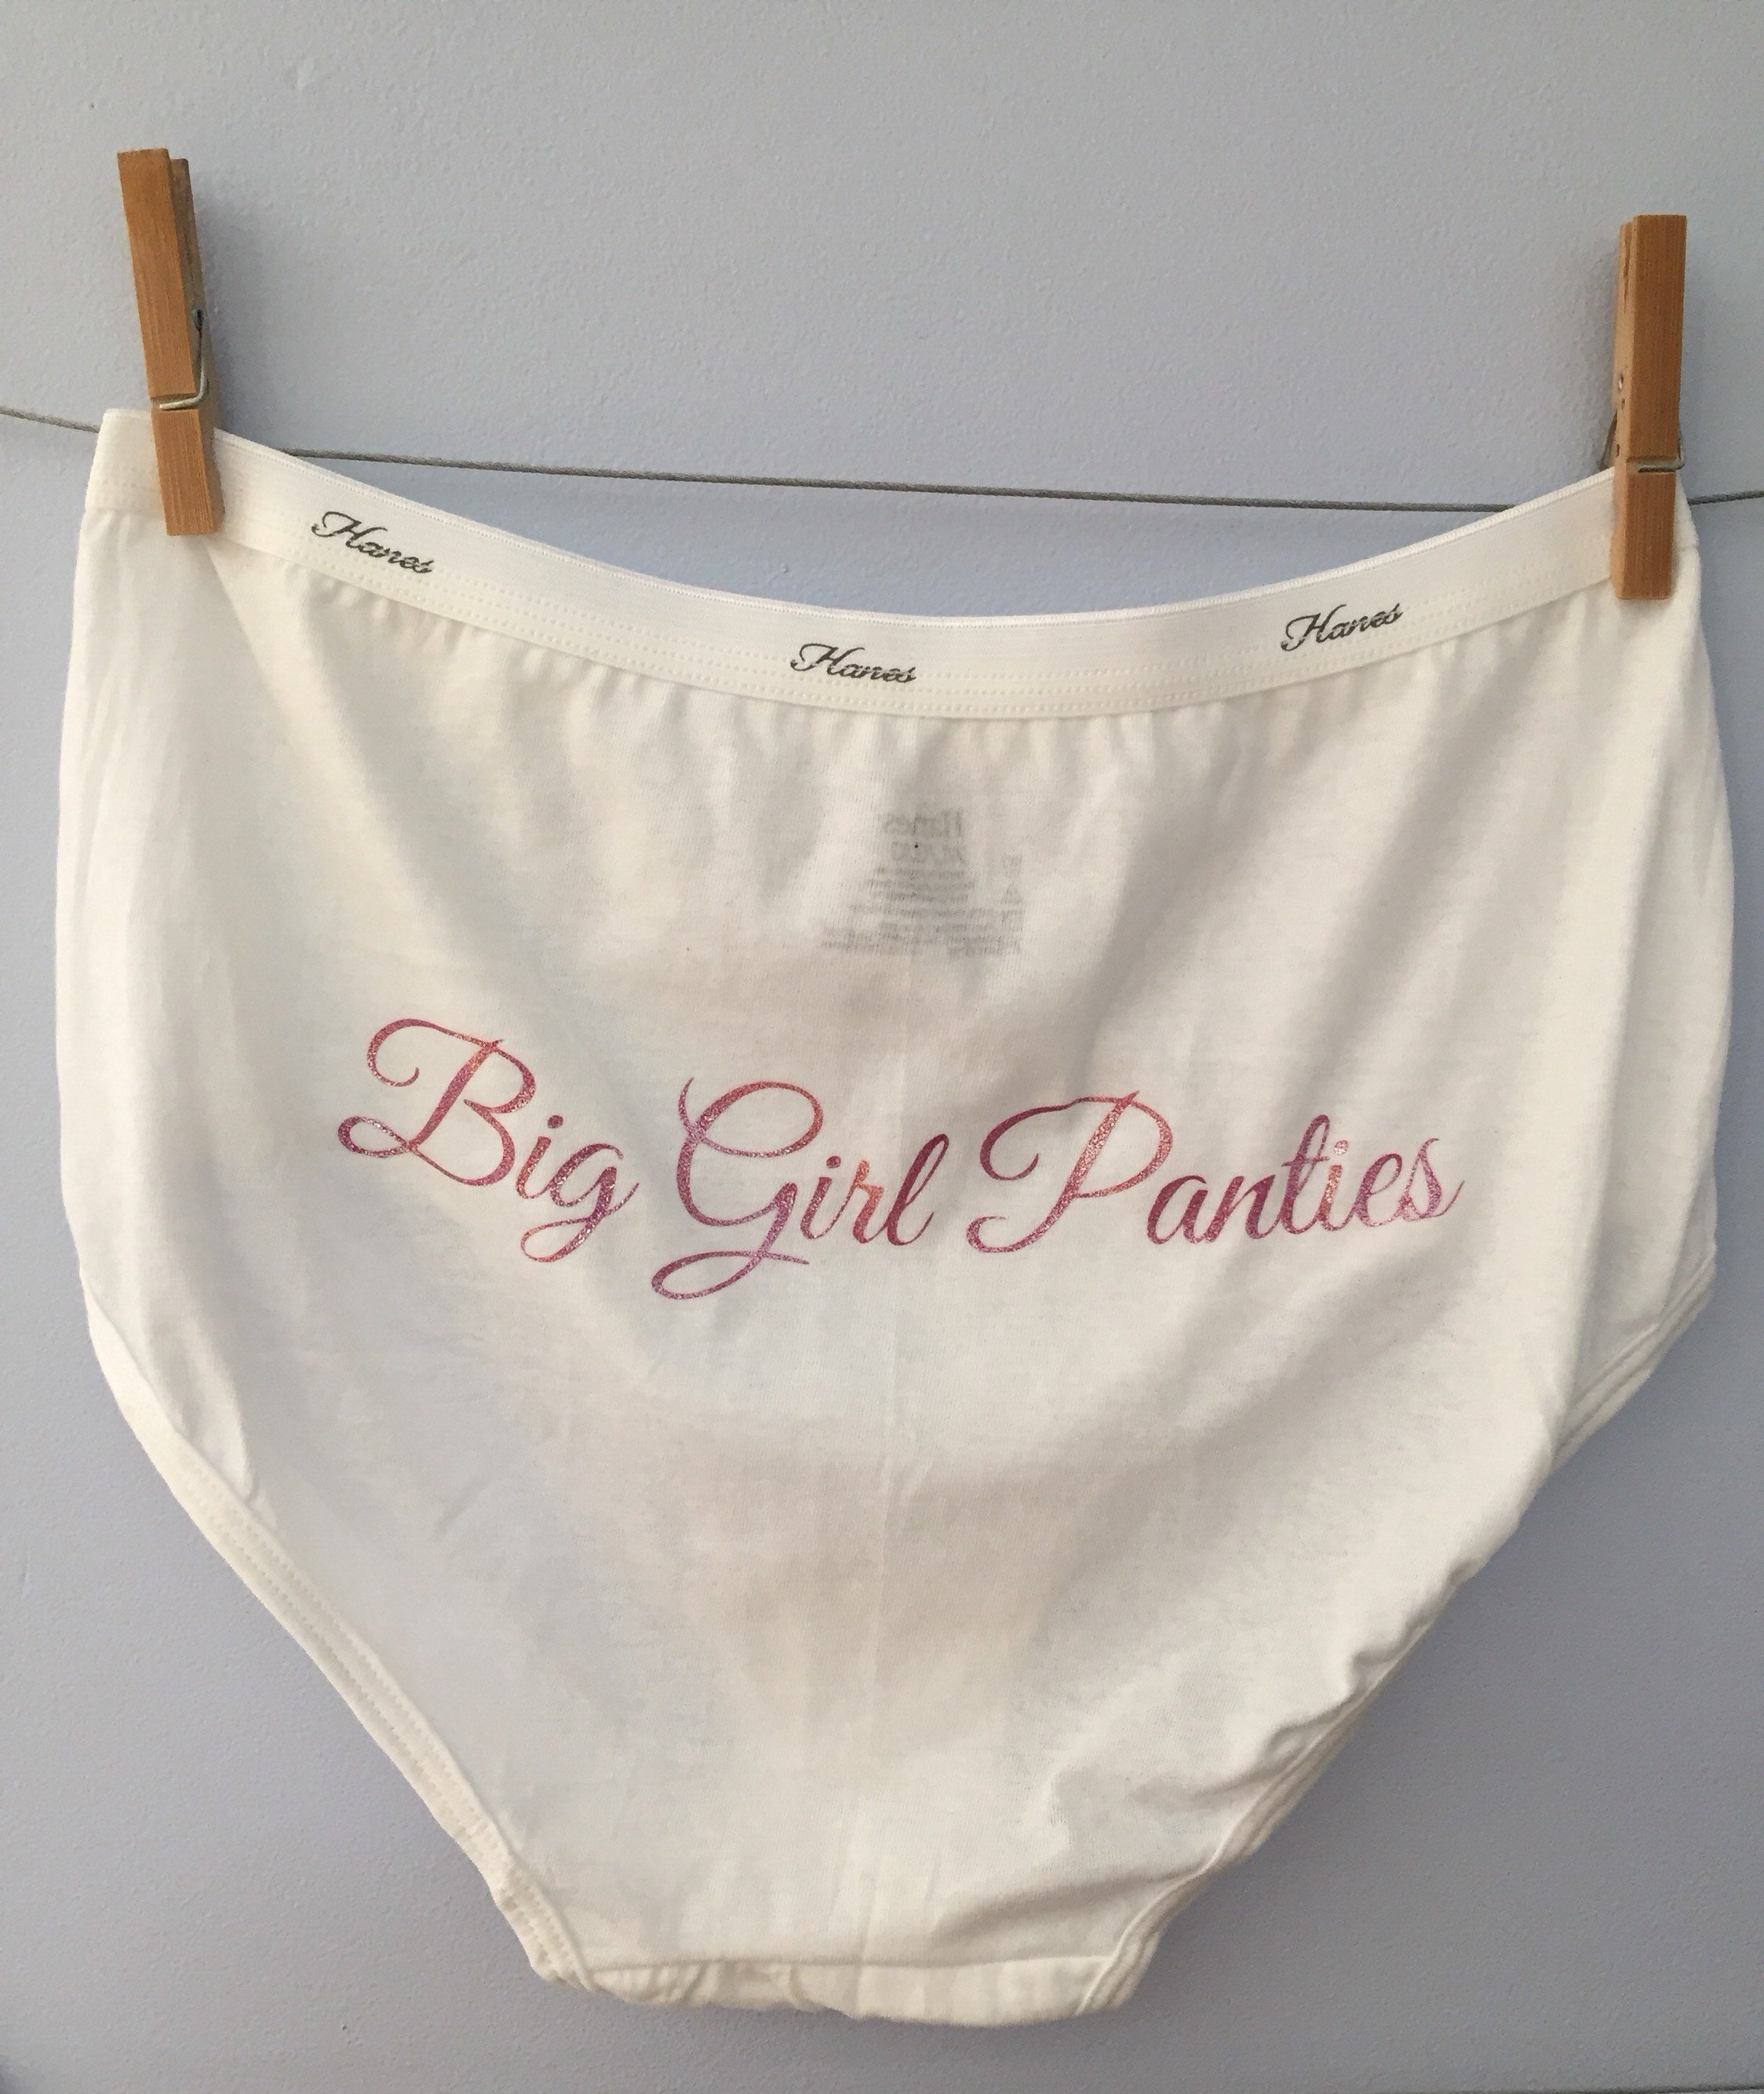 addie avery recommends big girl panties pics pic